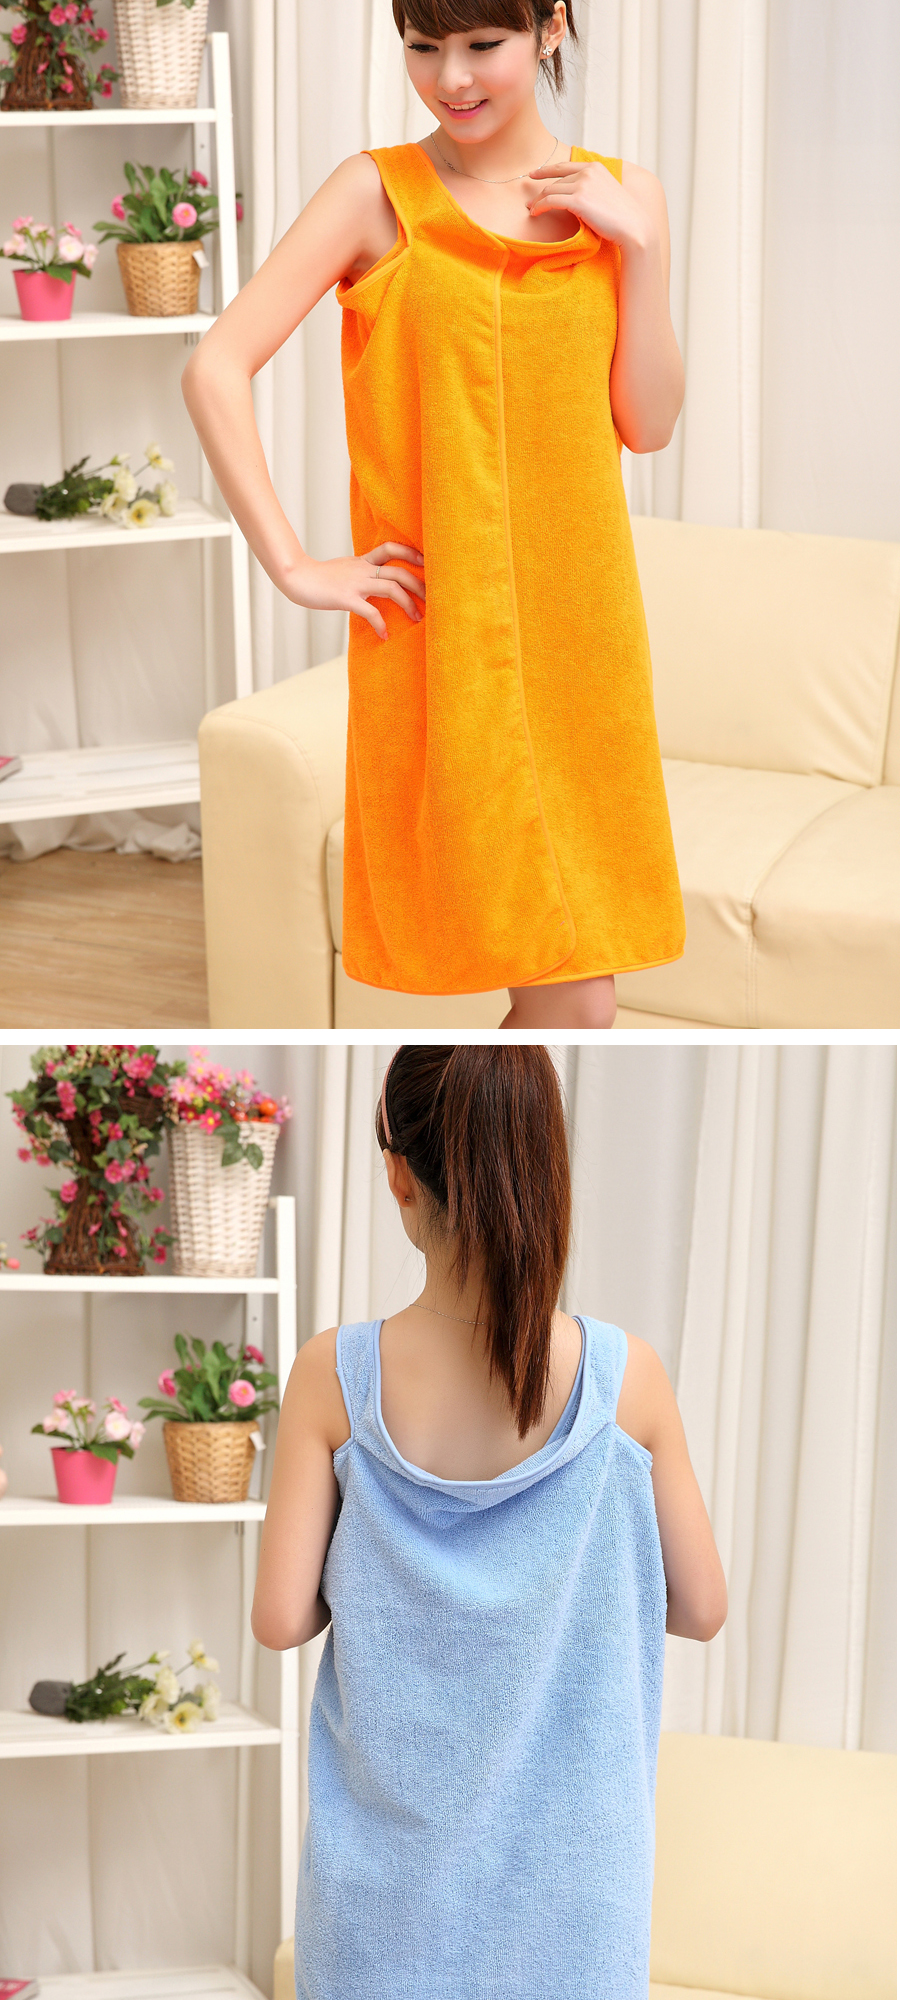 Gift for mothers, mom, women, men, Microfiber Soft Plush Highly Absorbent Wearable Bath Towel (US Stock)